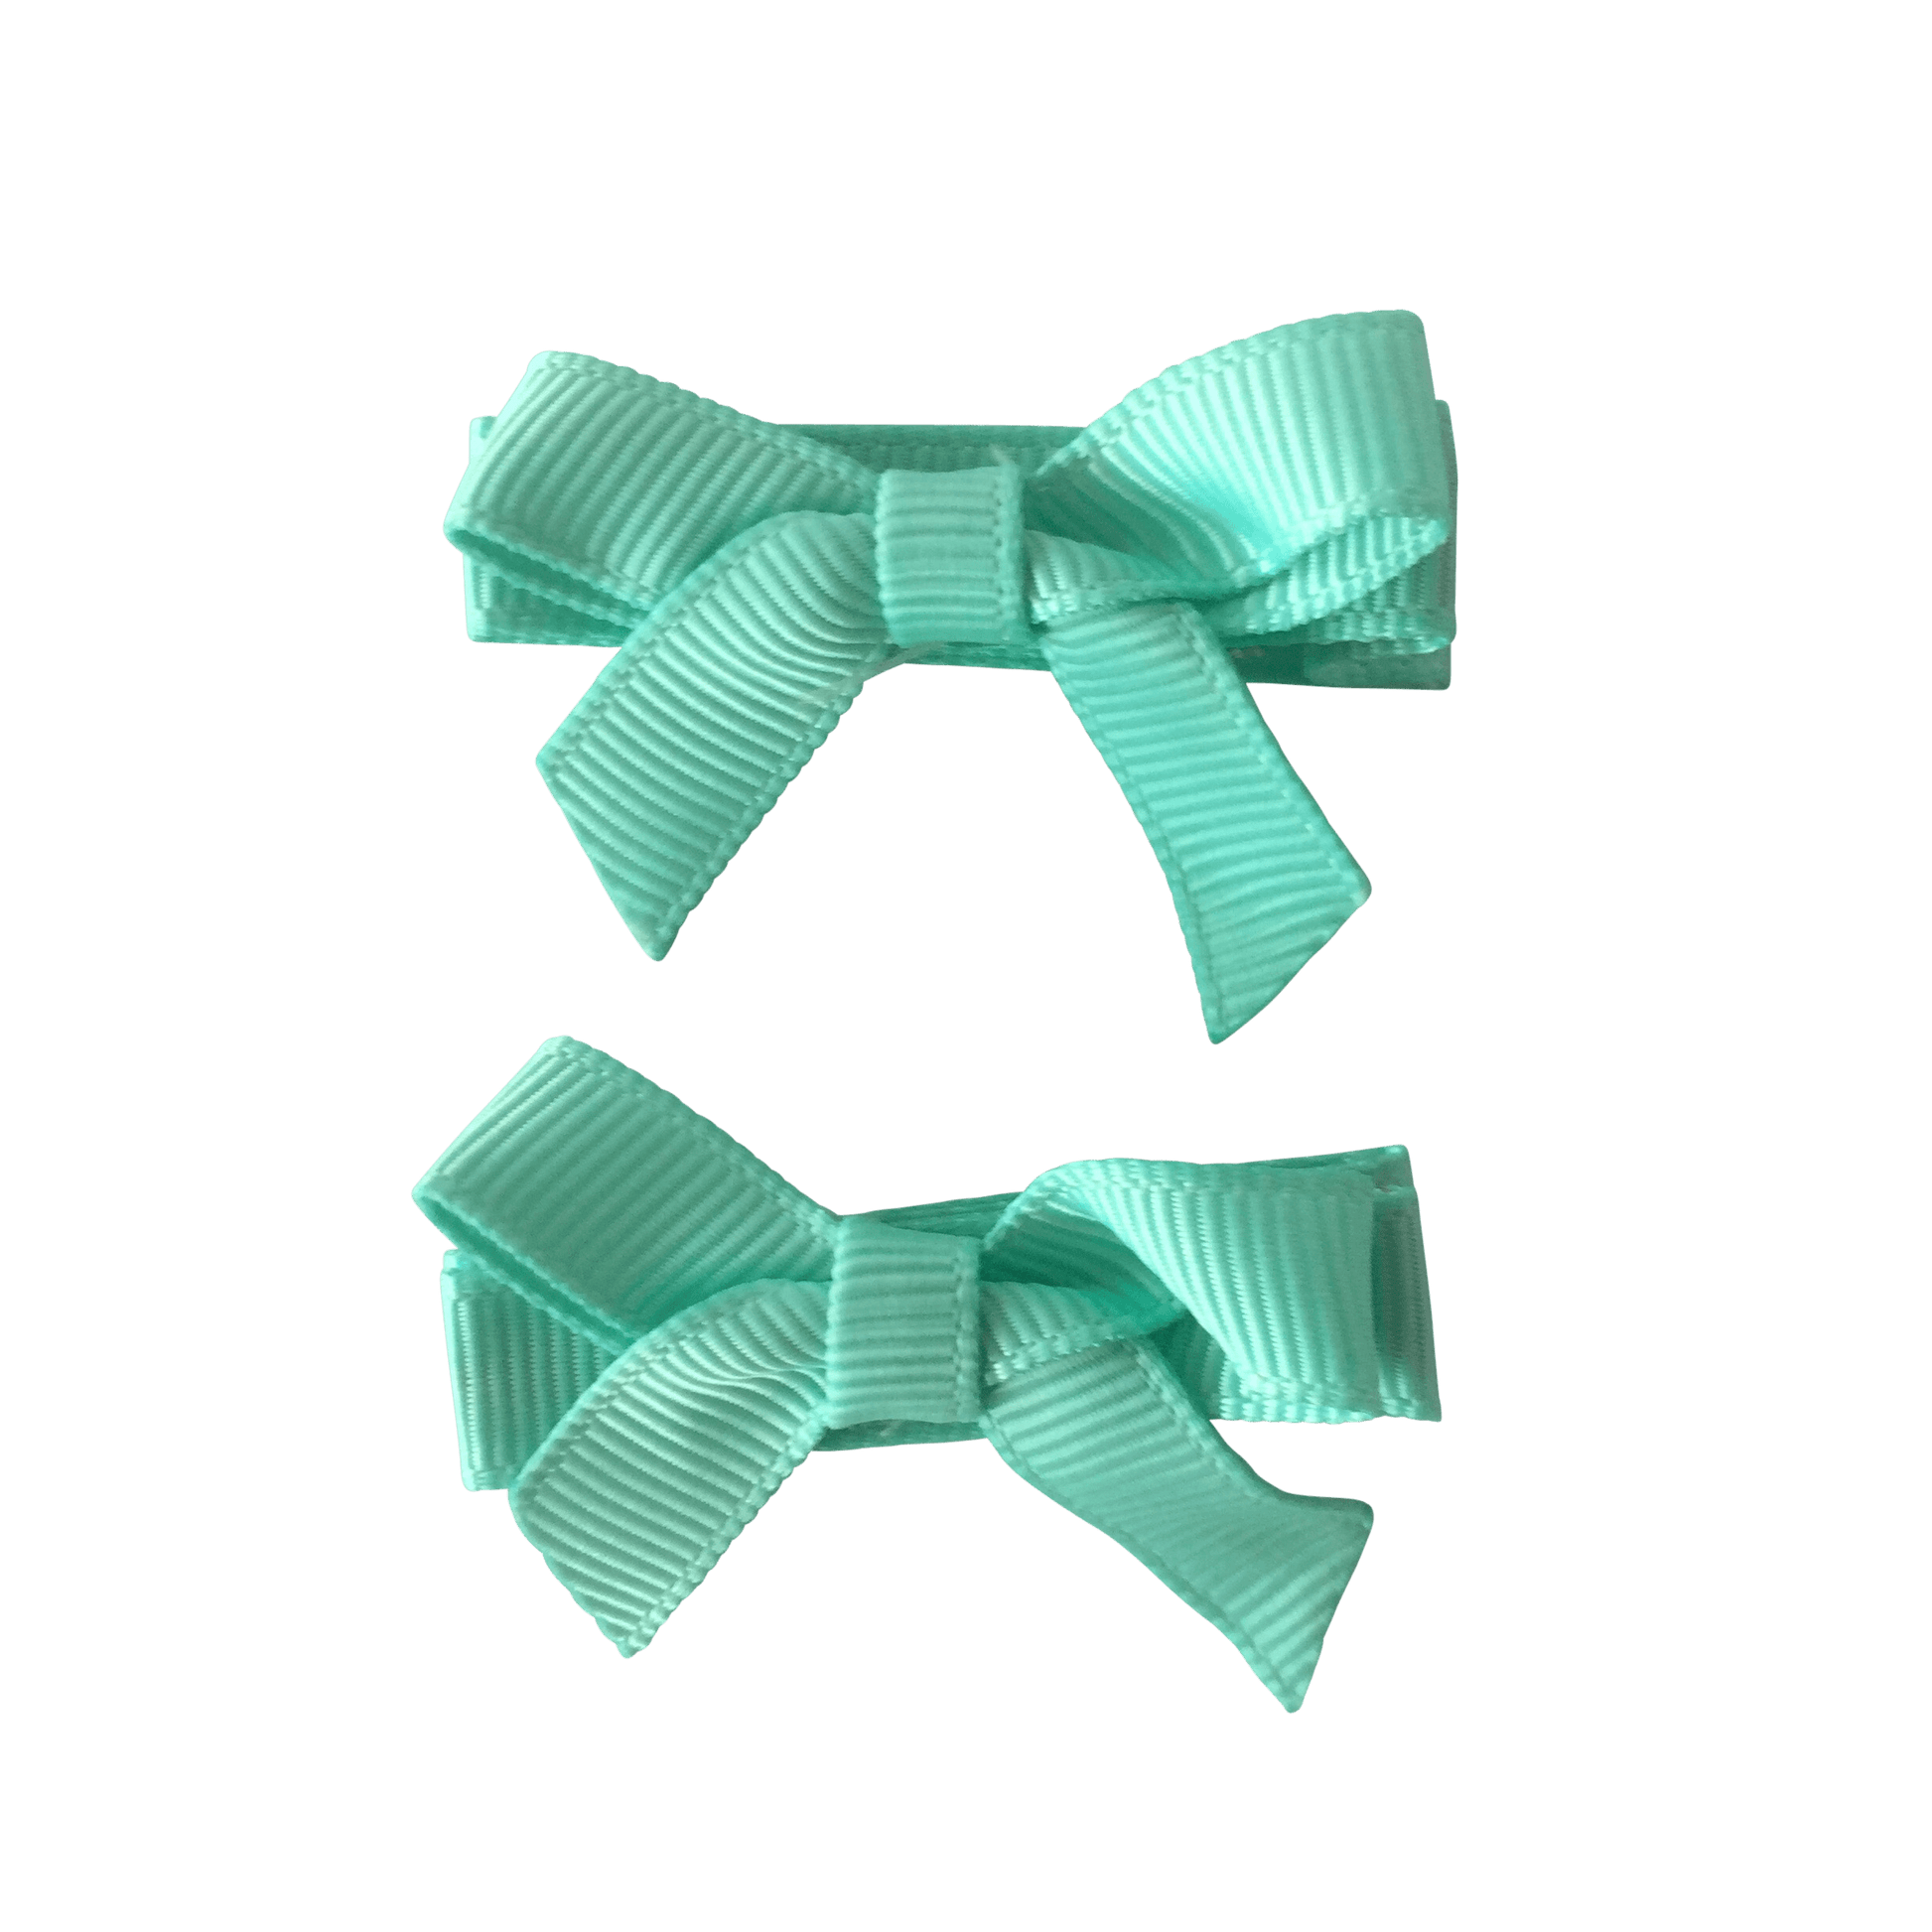 Mint Hair Accessories - Assorted Hair Accessories - School Uniform Hair Accessories - Ponytails and Fairytales